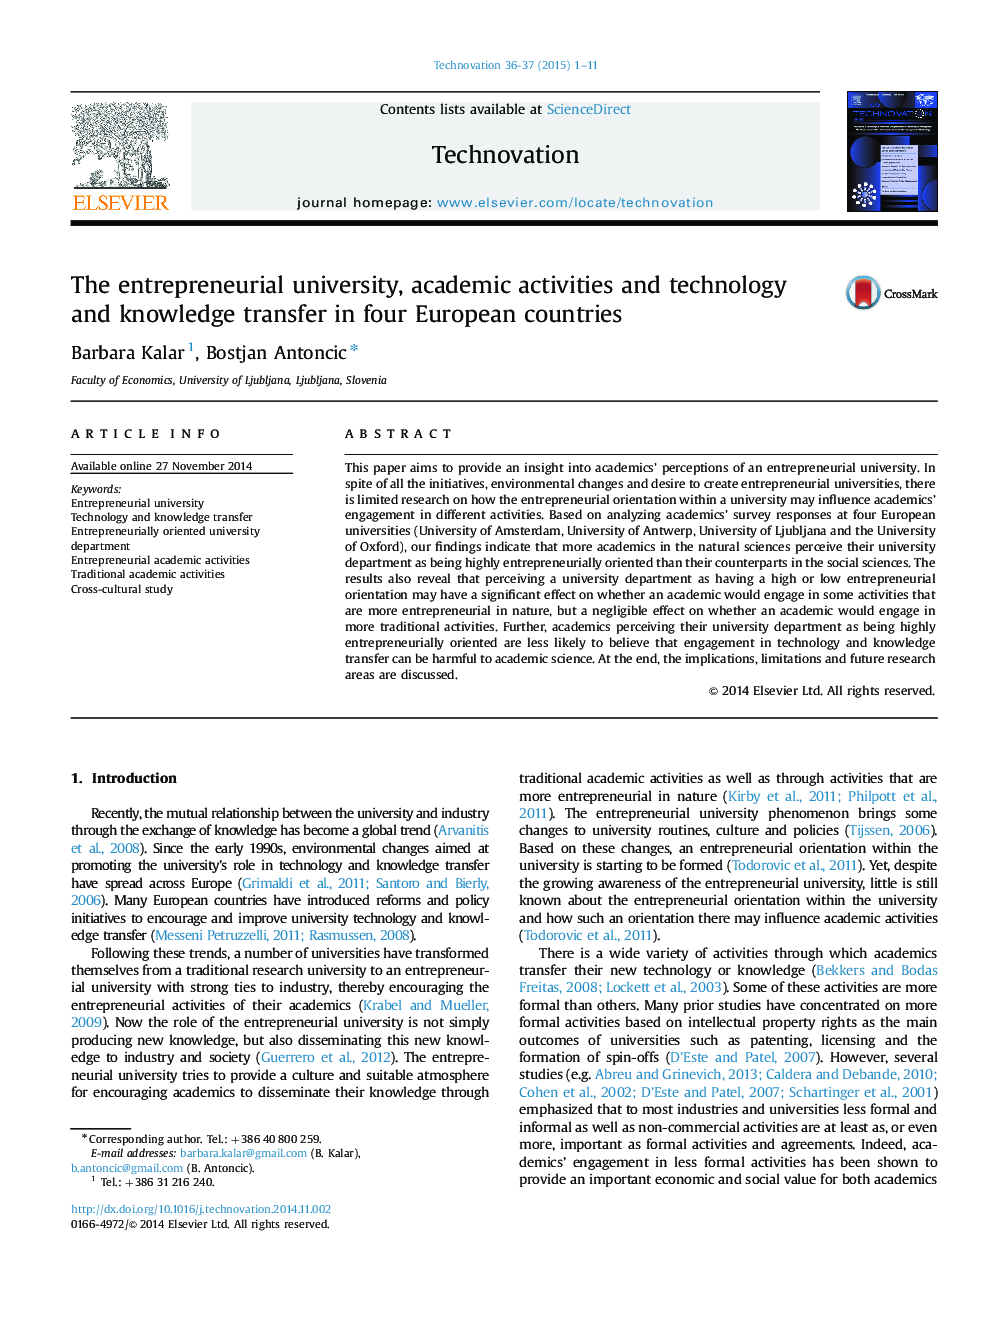 The entrepreneurial university, academic activities and technology and knowledge transfer in four European countries